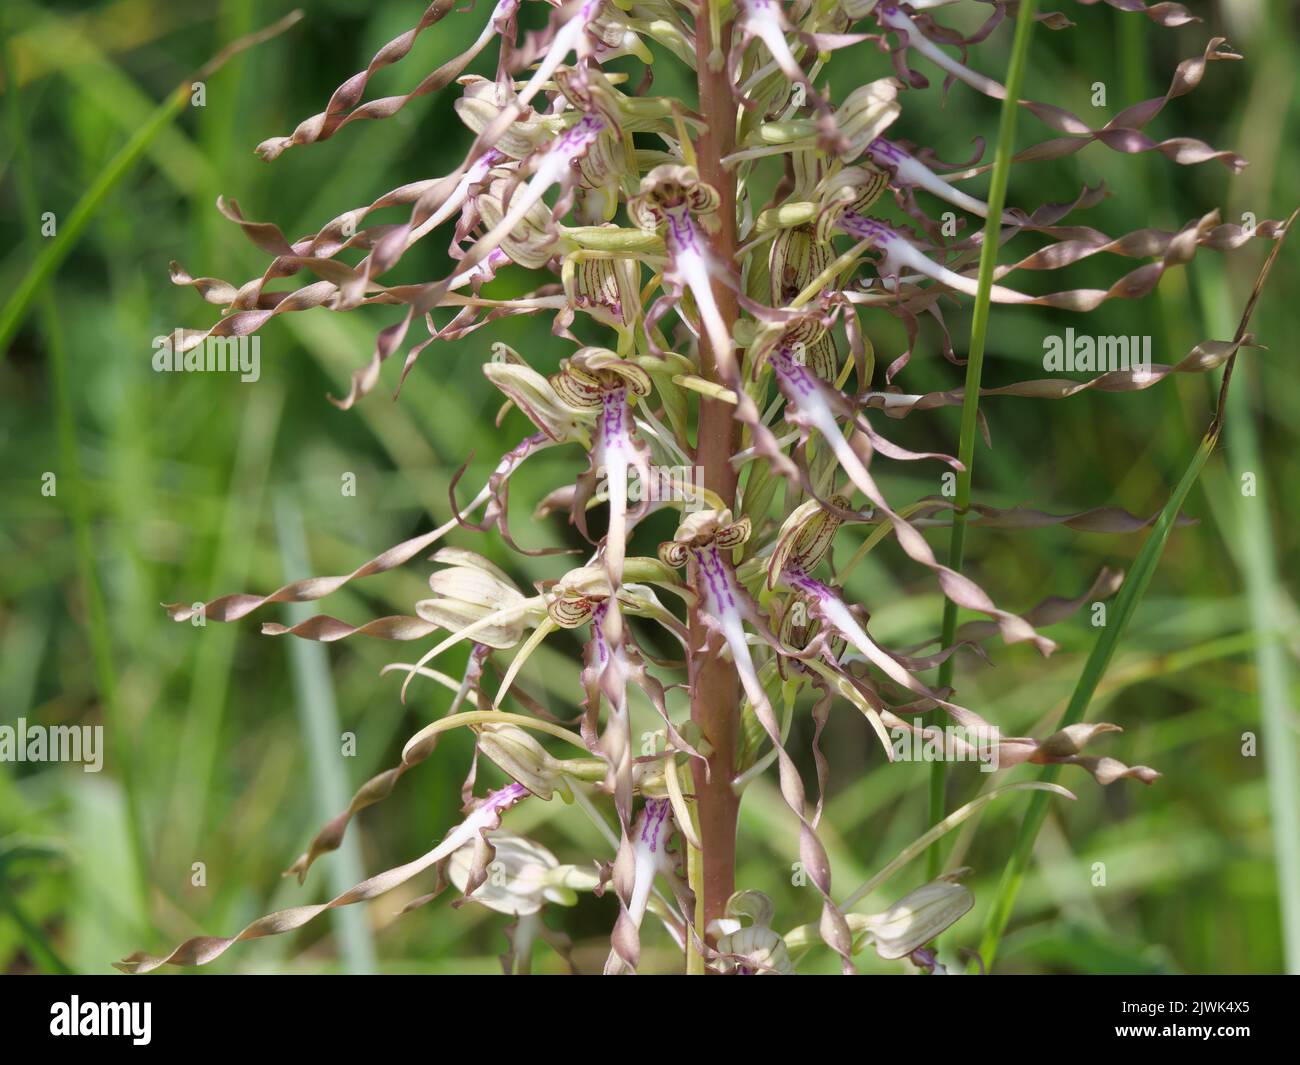 The gigantic blossoms and inflorescences of the goat's belt tongue, Himantoglossum hircinum, on a dry grassland near Würzburg Stock Photo